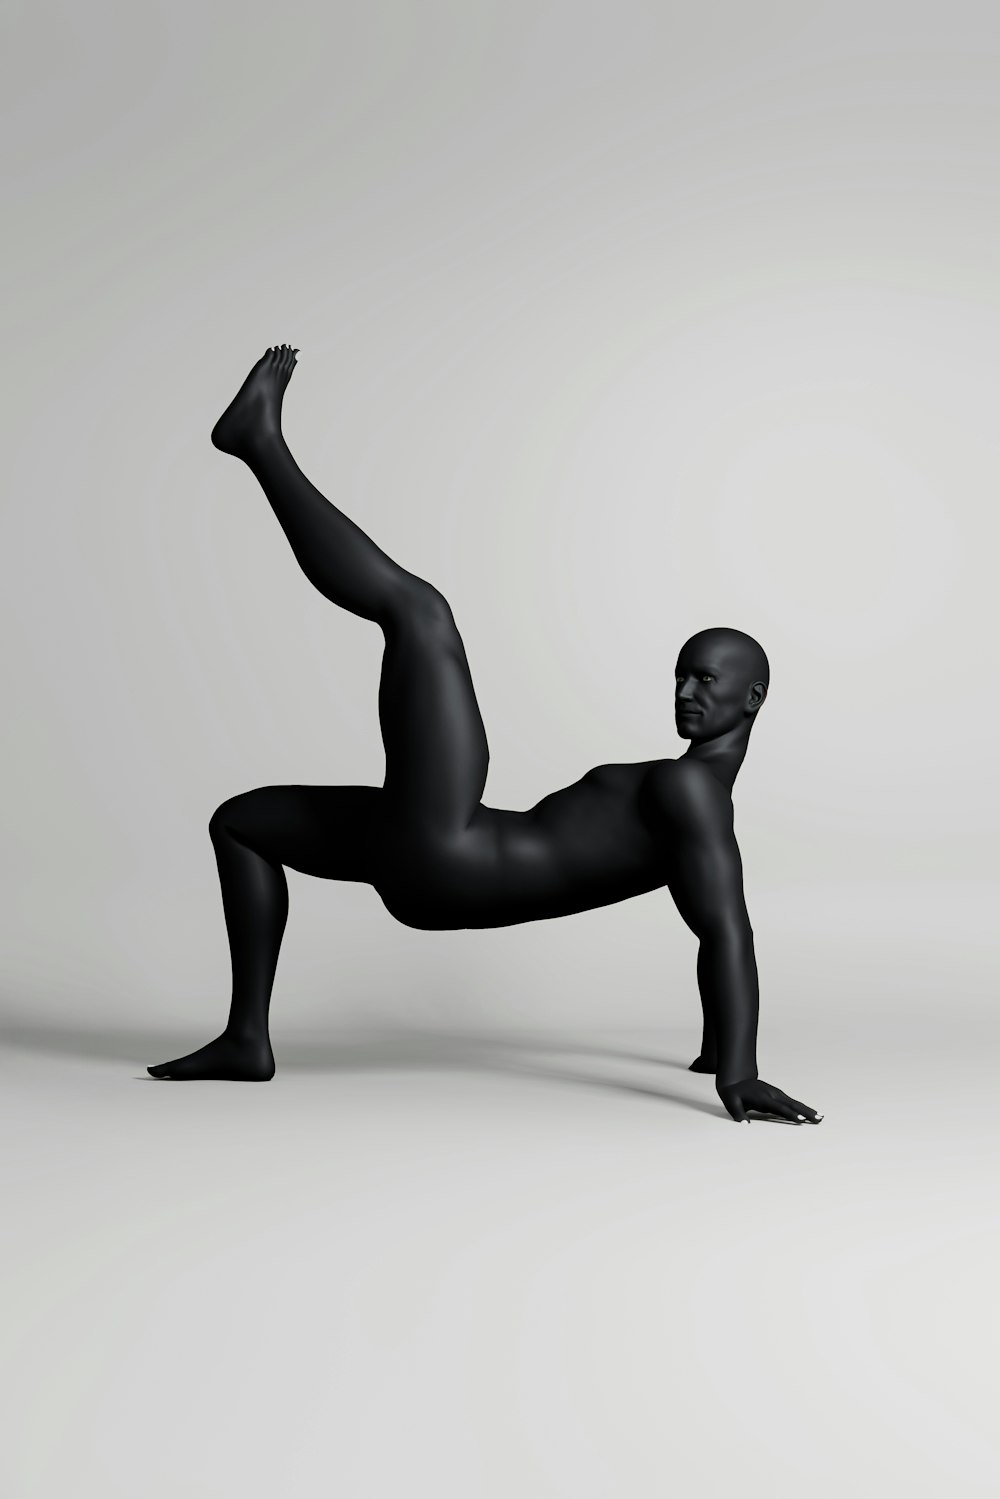 a person in a black body suit doing a yoga pose